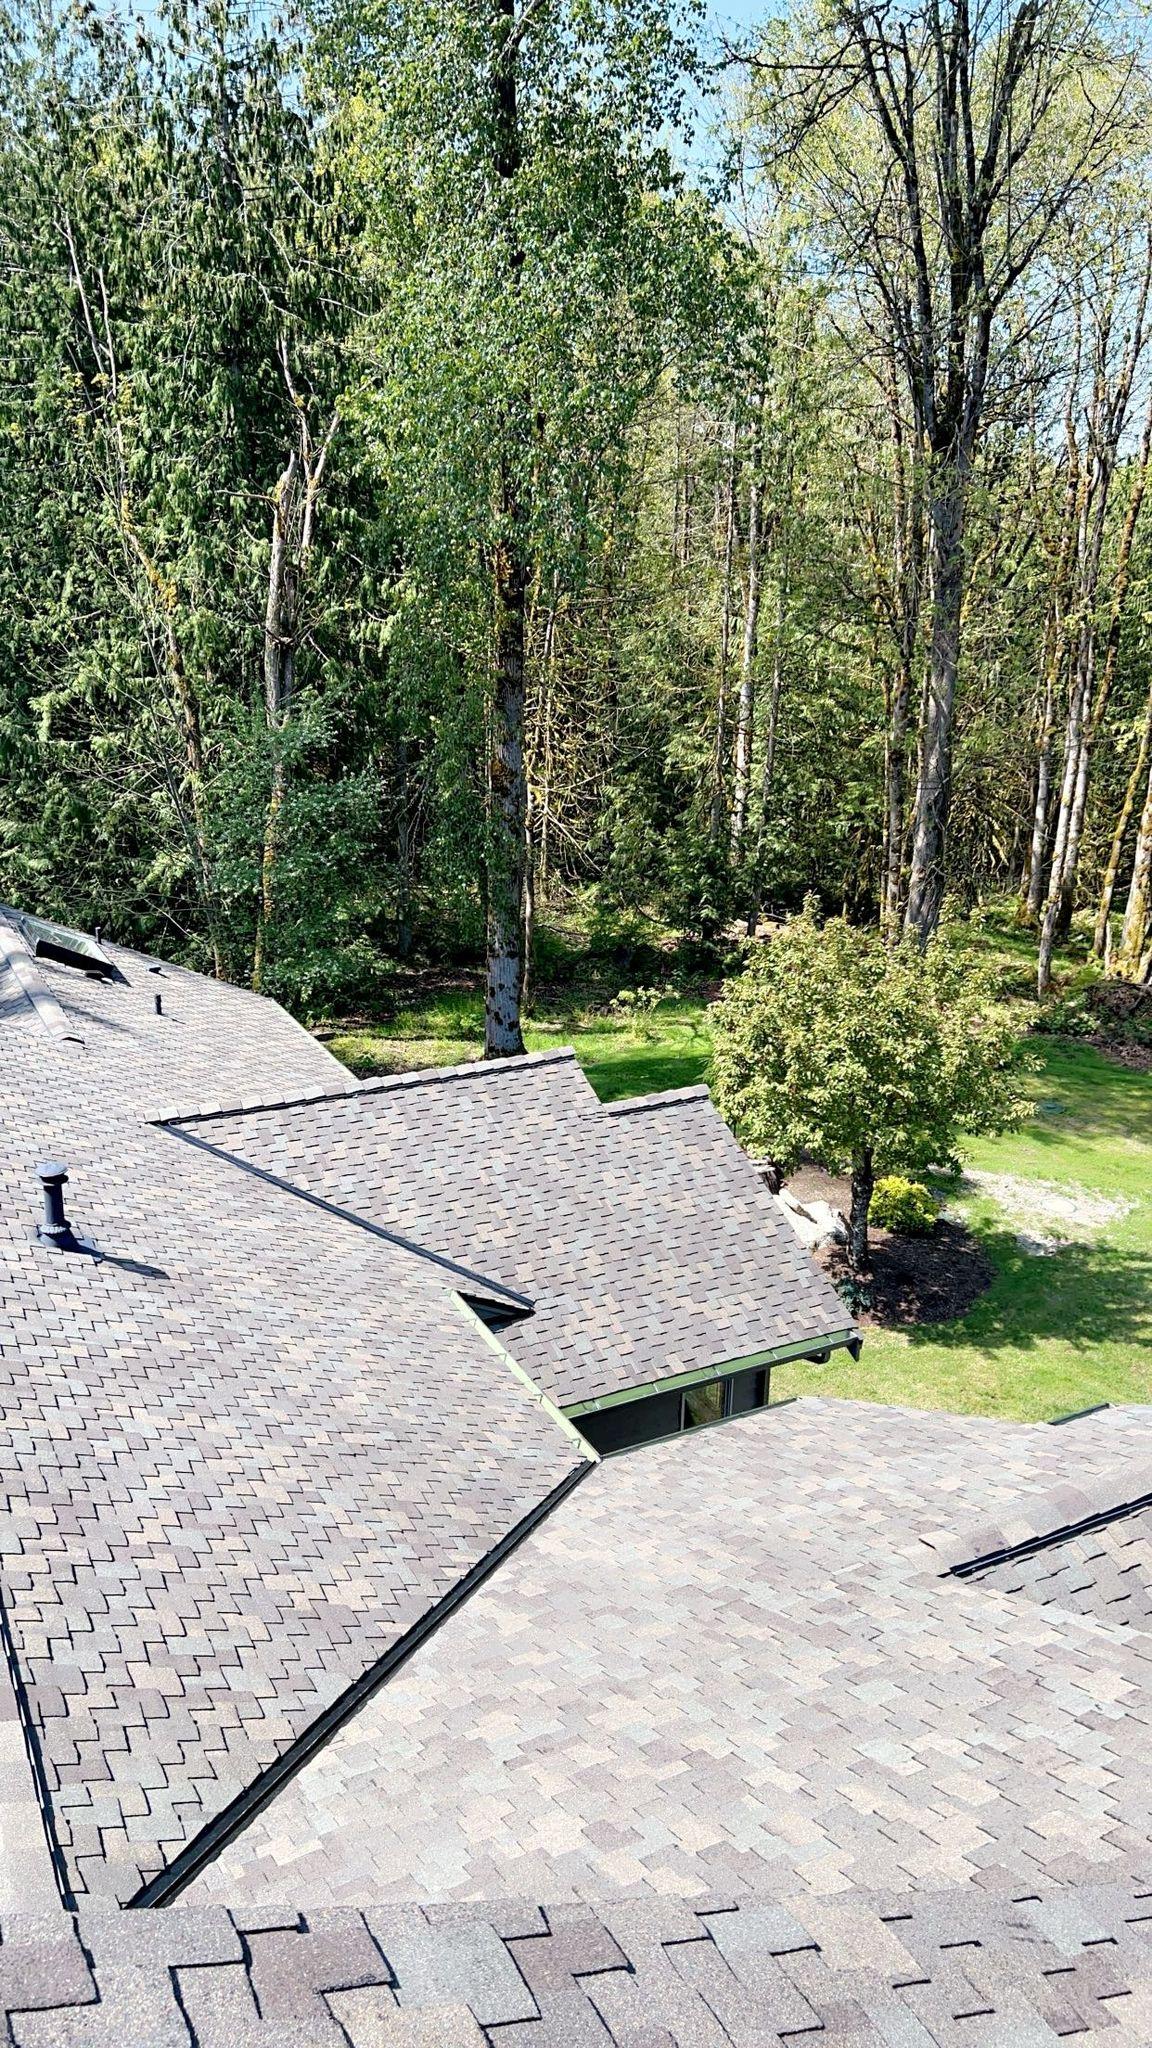 A house that had a roof replacement done.